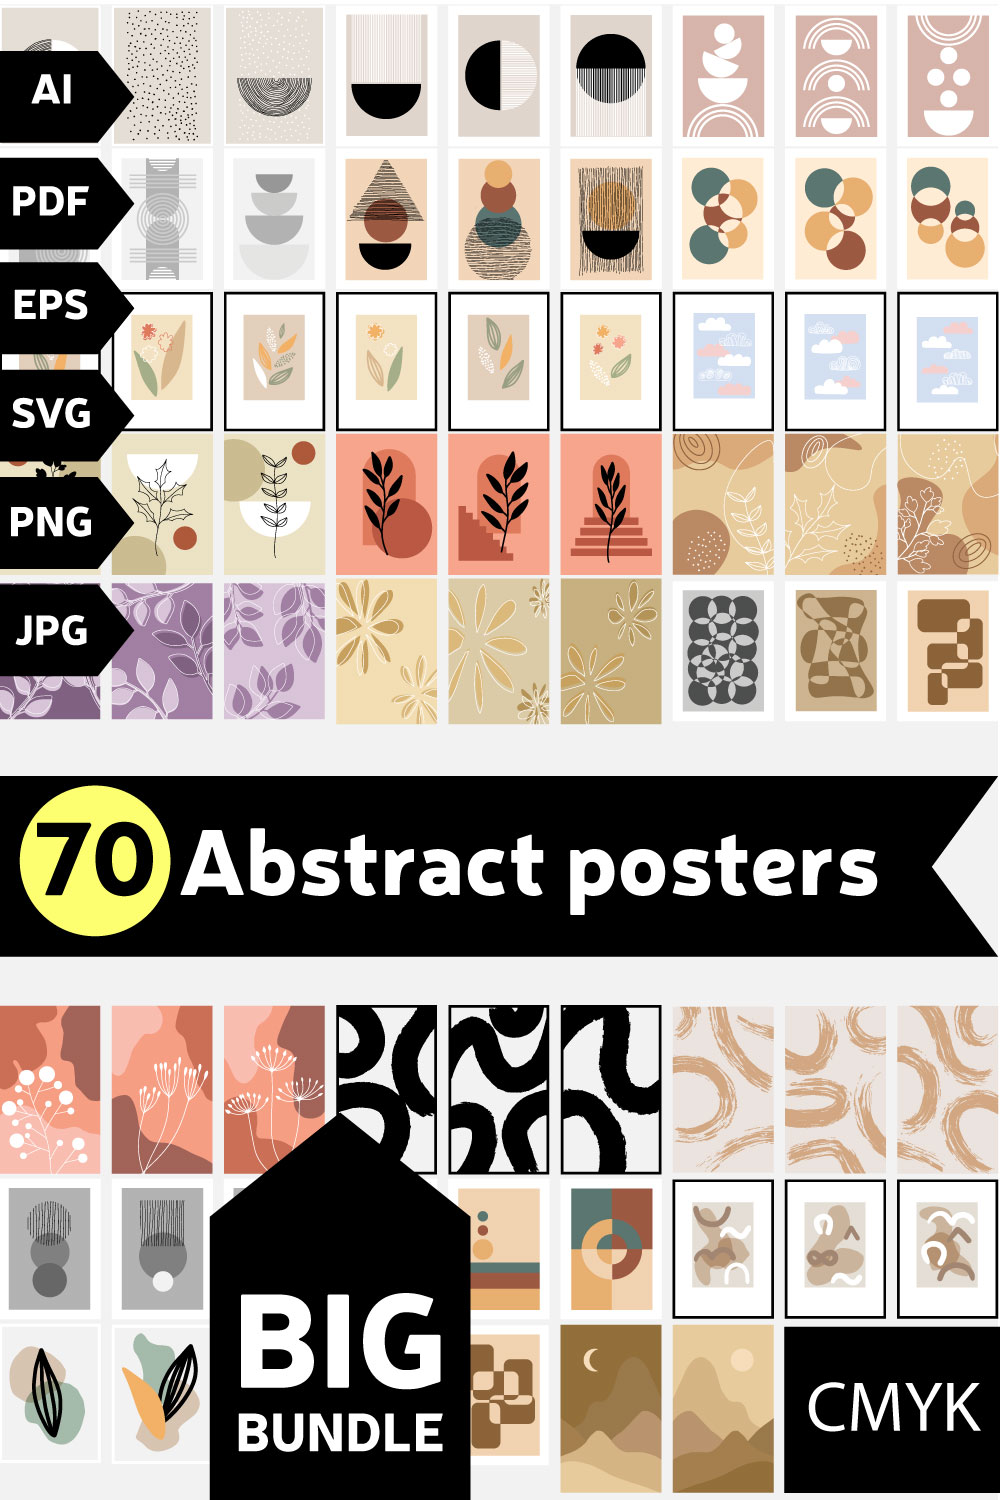 Abstract posters | Big bundle abstract cards pinterest preview image.